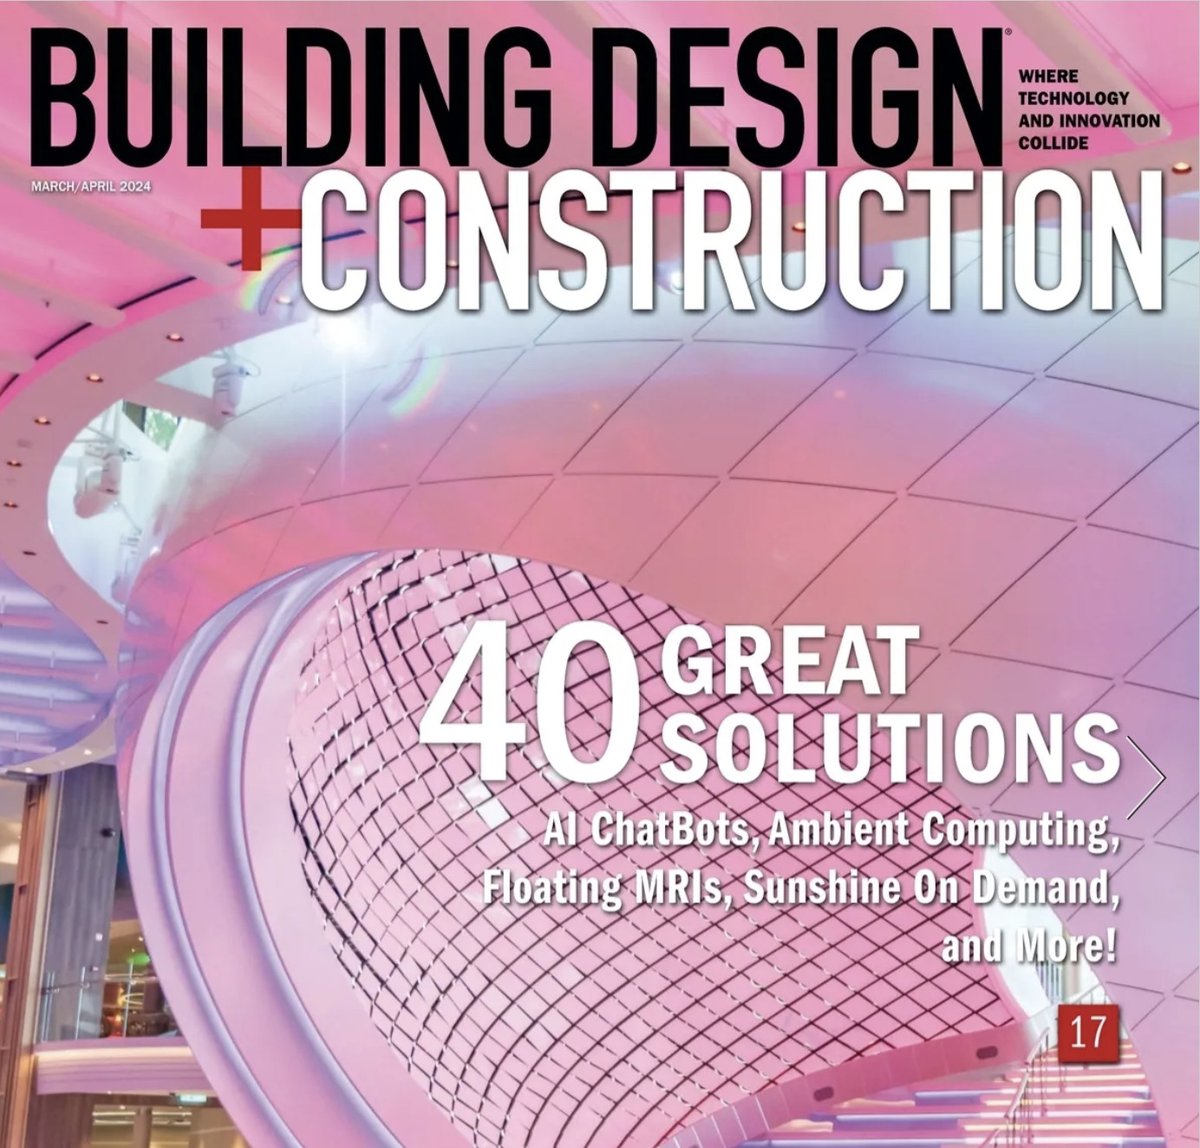 The new @ucihealth-Irvine features floating MRIs to isolate vibration and protect the imaging quality from the surrounding infrastructure. Learn more about this unique design solution in the latest @BDCNetwork issue. mydigitalpublication.com/publication/?m…